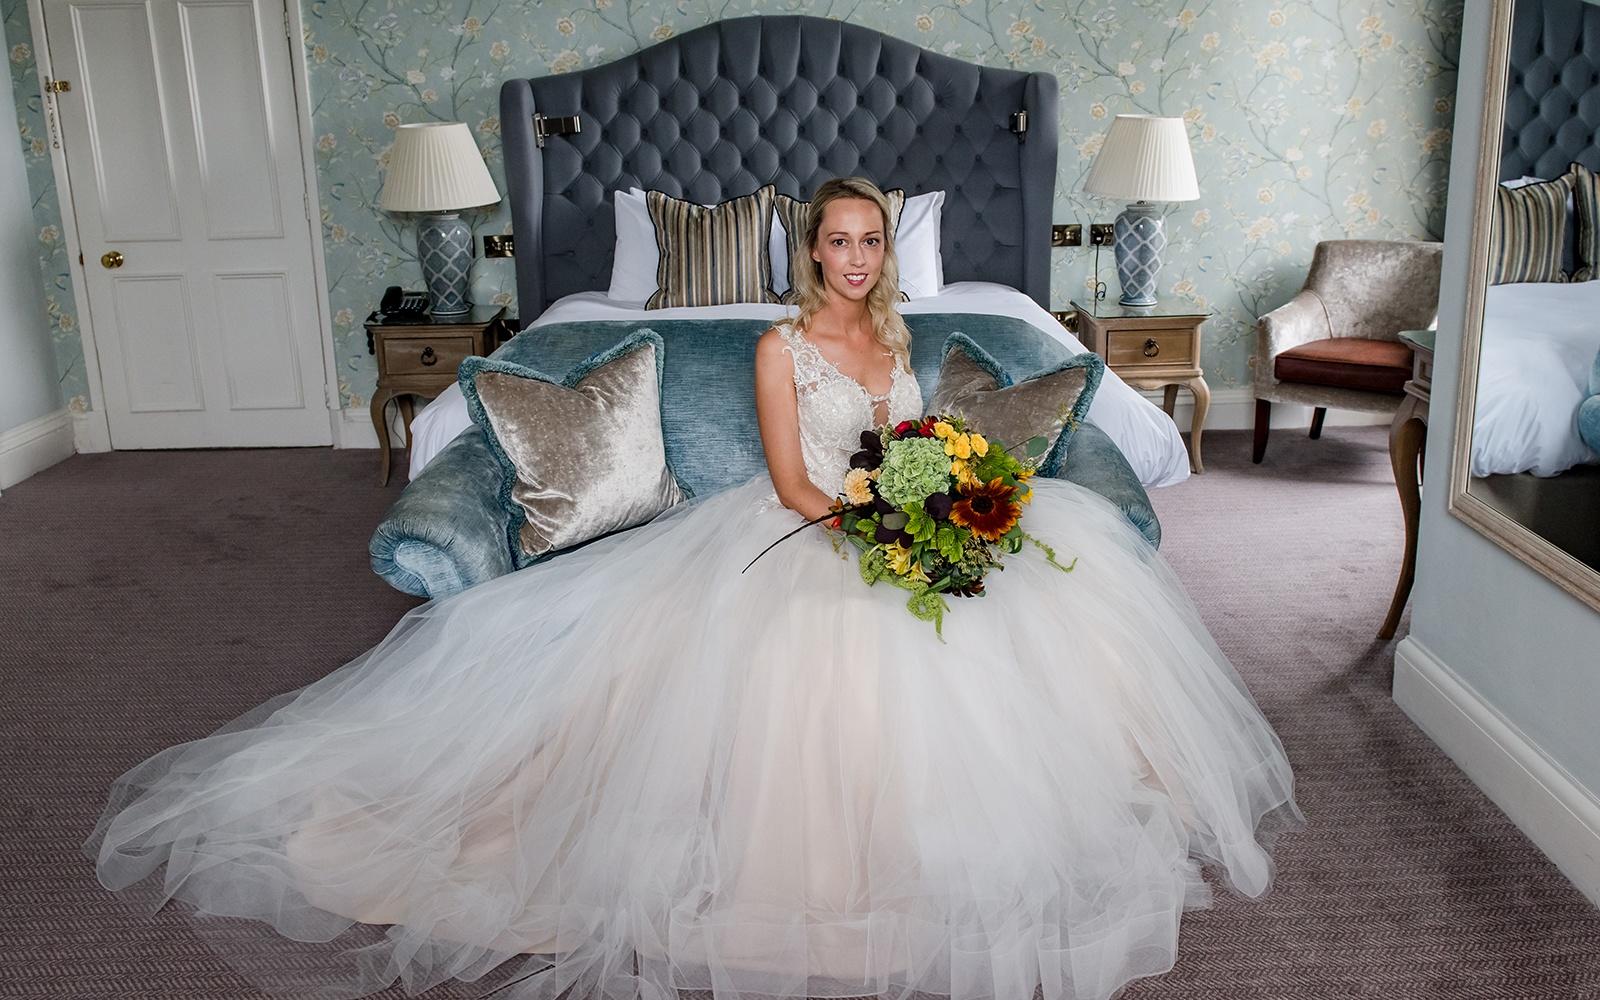 Make Up By Carissa makeup artist Cirencester Gloucestershire cruelty free make-up styled shoot Stratton House Cotswold refurbished bedrooms large ball gown wedding dress